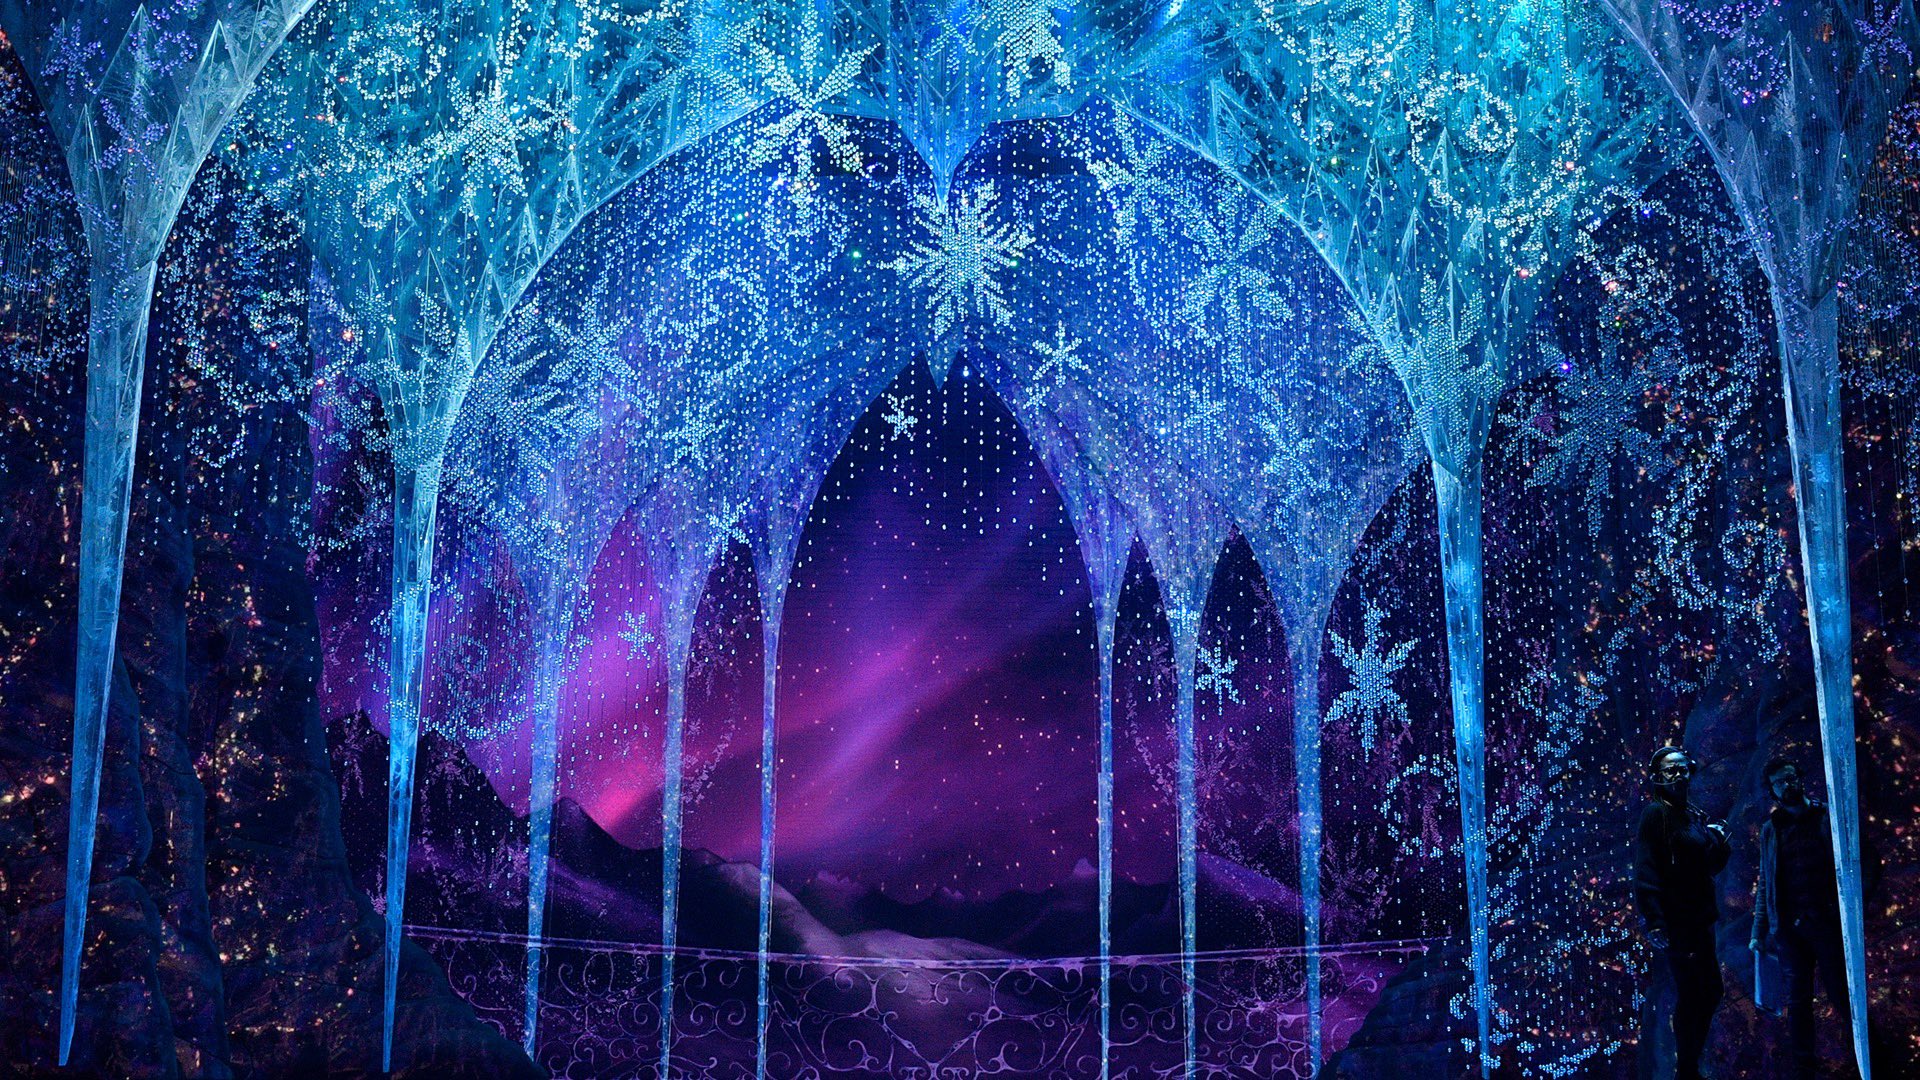 Frozen 2 - Ice landscape from the Frozen Broadway musical